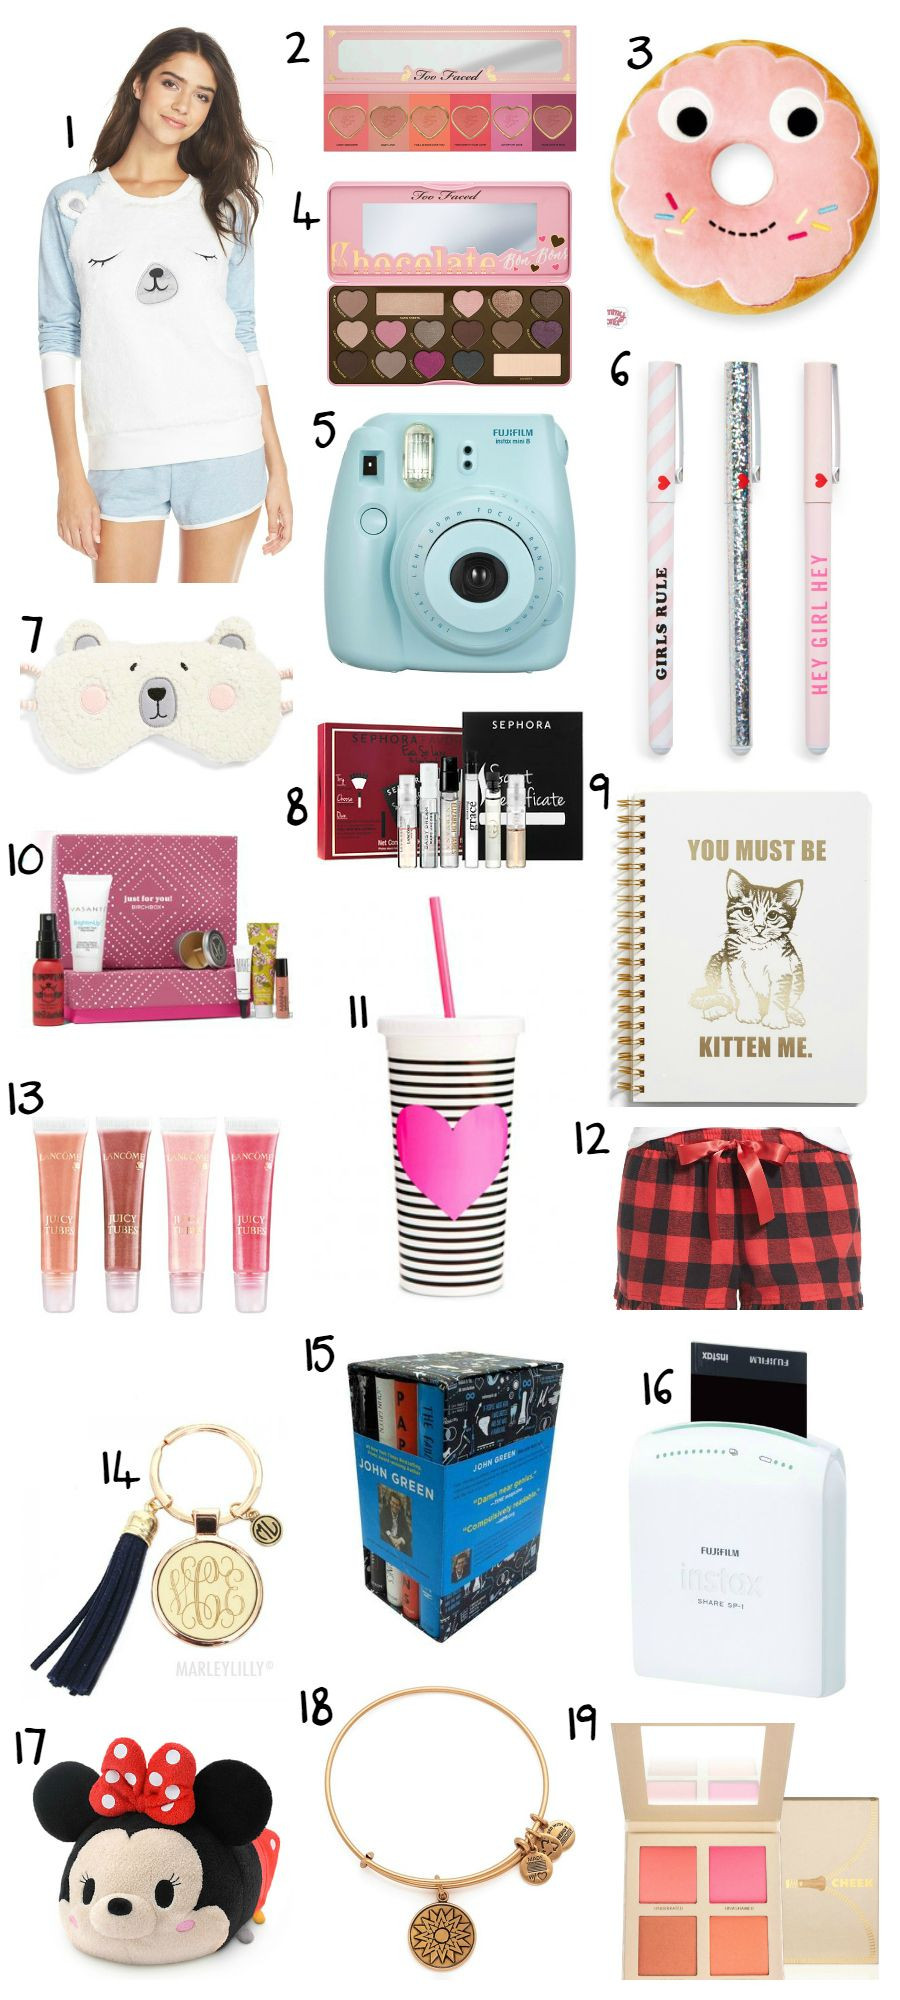 Top Gift Ideas For Girls
 The Best Christmas Gift Ideas for Teens